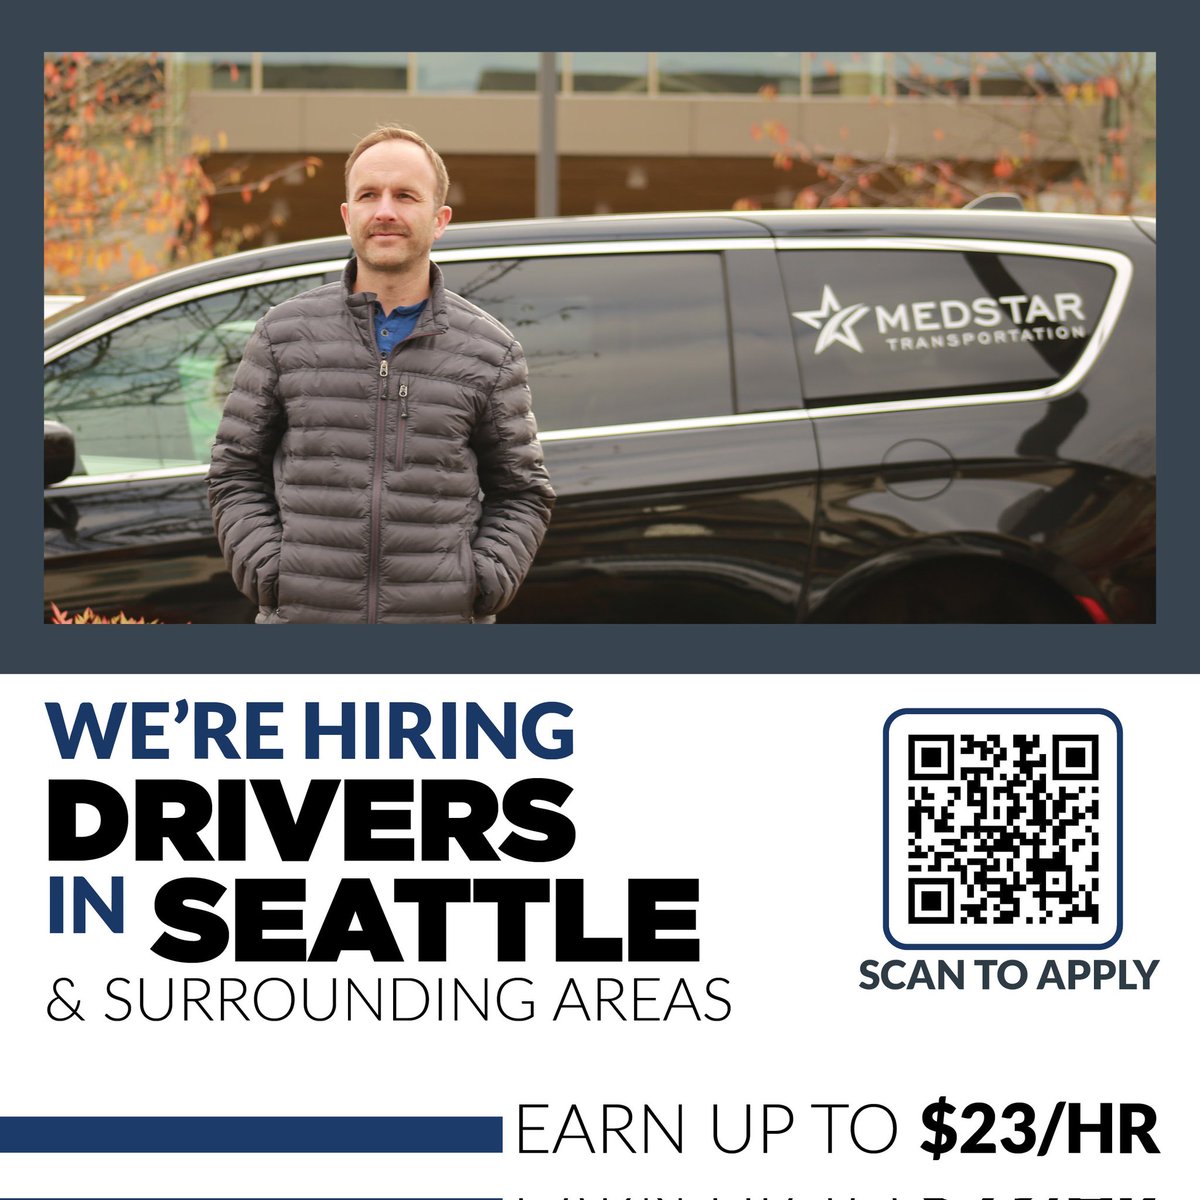 URGENT HIRING!
Medstar Transportation is looking for Safety Transport and Care Drivers across SEATTLE, WA.

Scan the QR Code or click the link to APPLY: gomedstar.bamboohr.com/jobs/

#wajobs
#SEATTLEjobs
#jobsinwashingtonstate
#jobseekersinwa